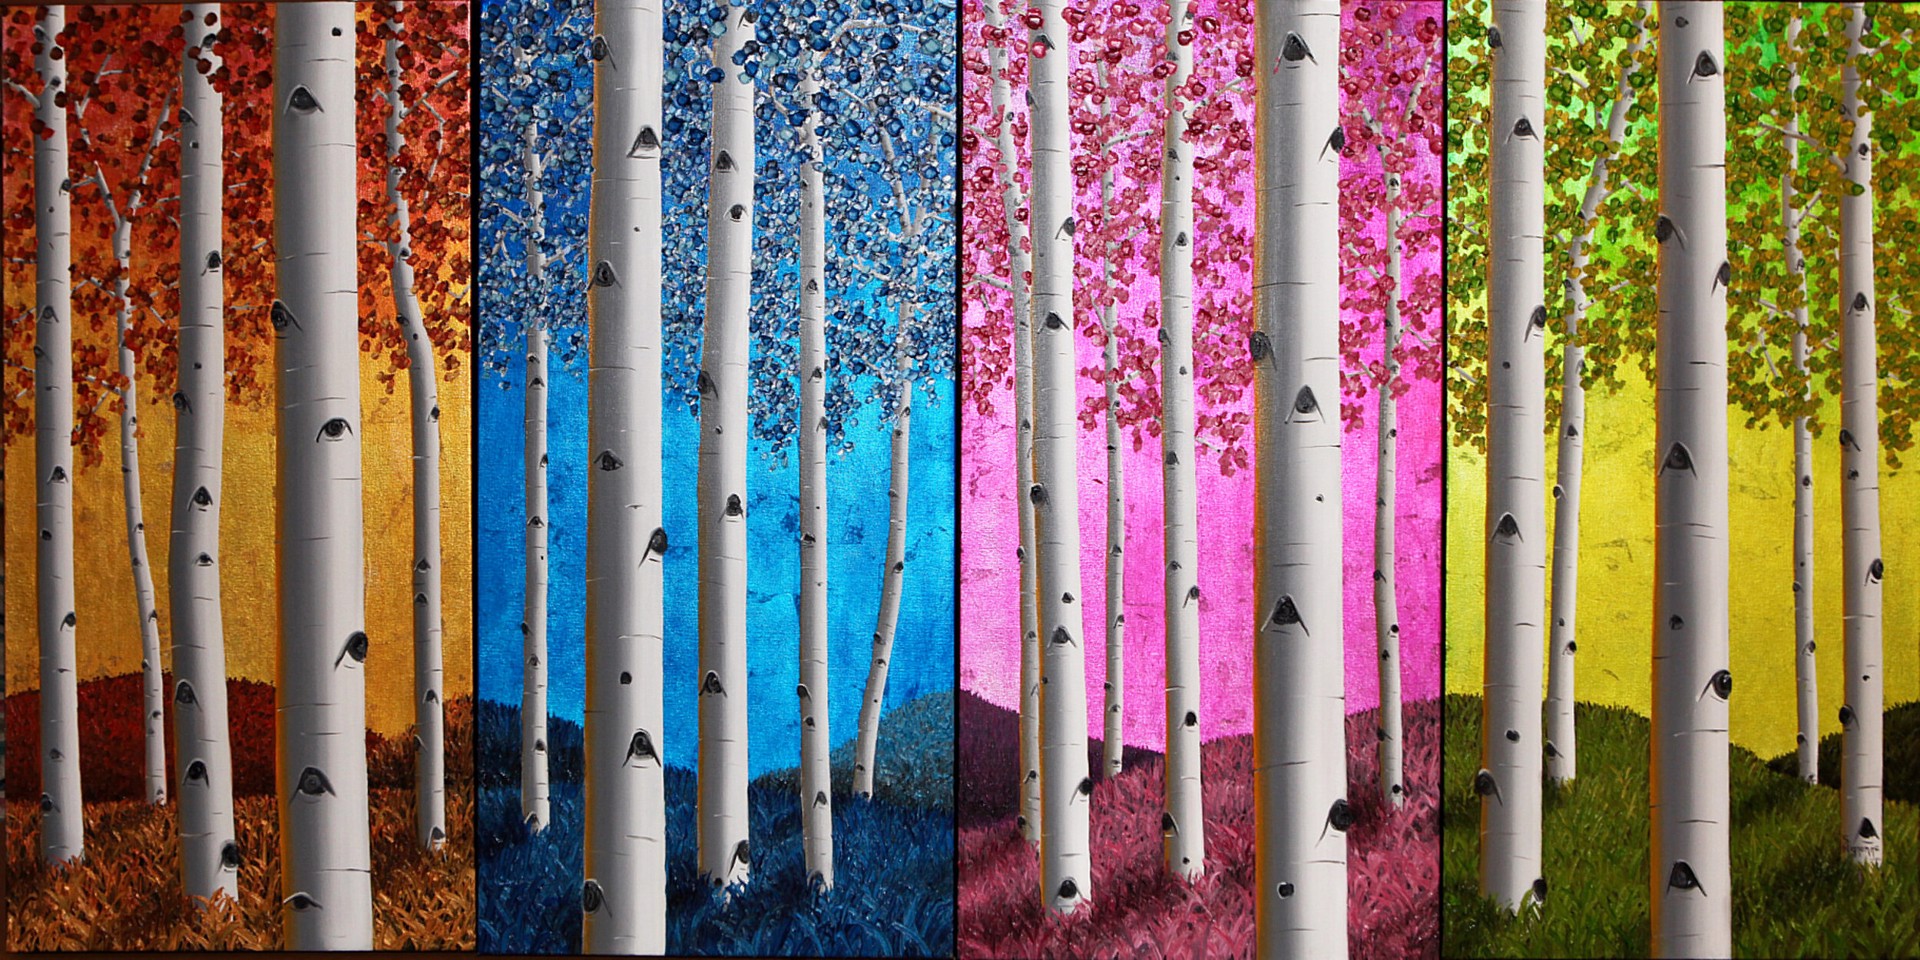 “Seasons of Steamboat” Winter, Spring, Summer and Fall by Sherri Mignonne